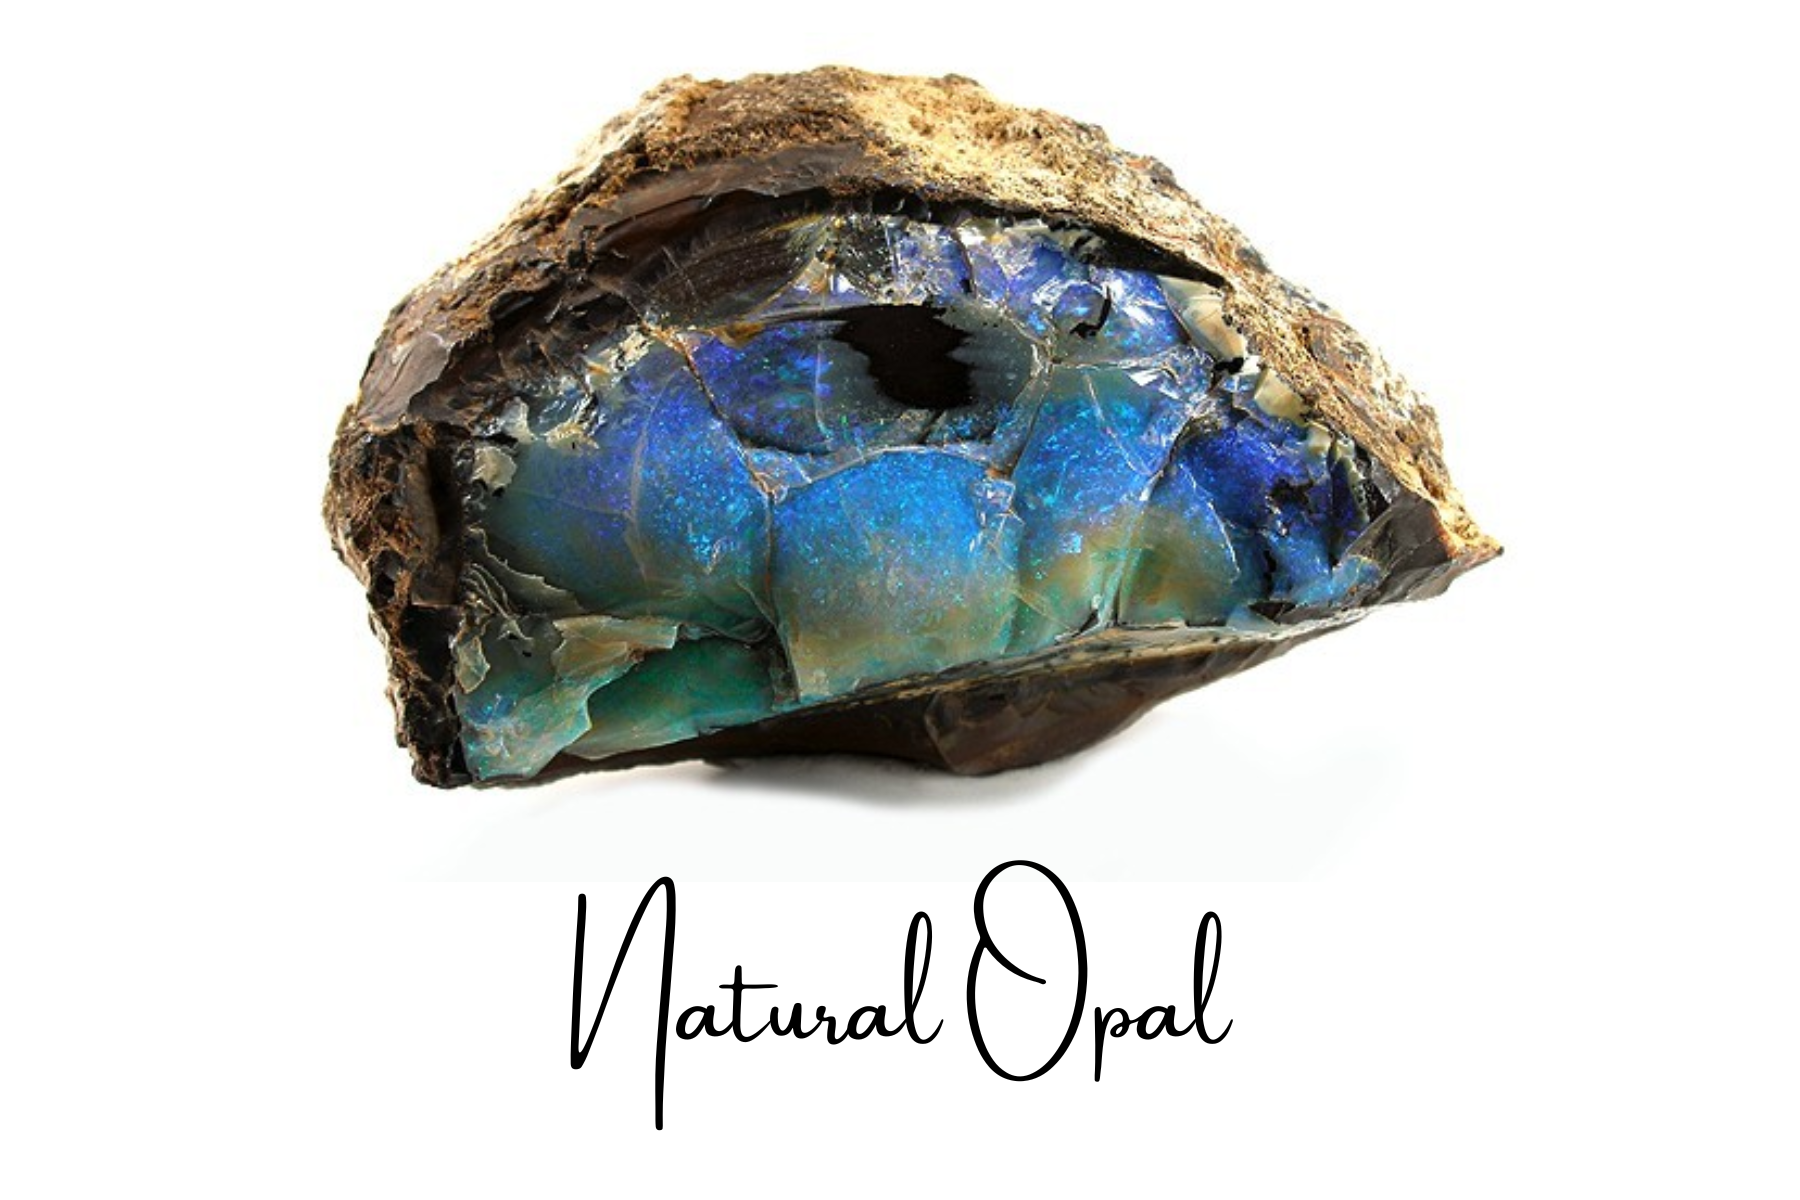  A blue opal stone that is still coneted on its host rock